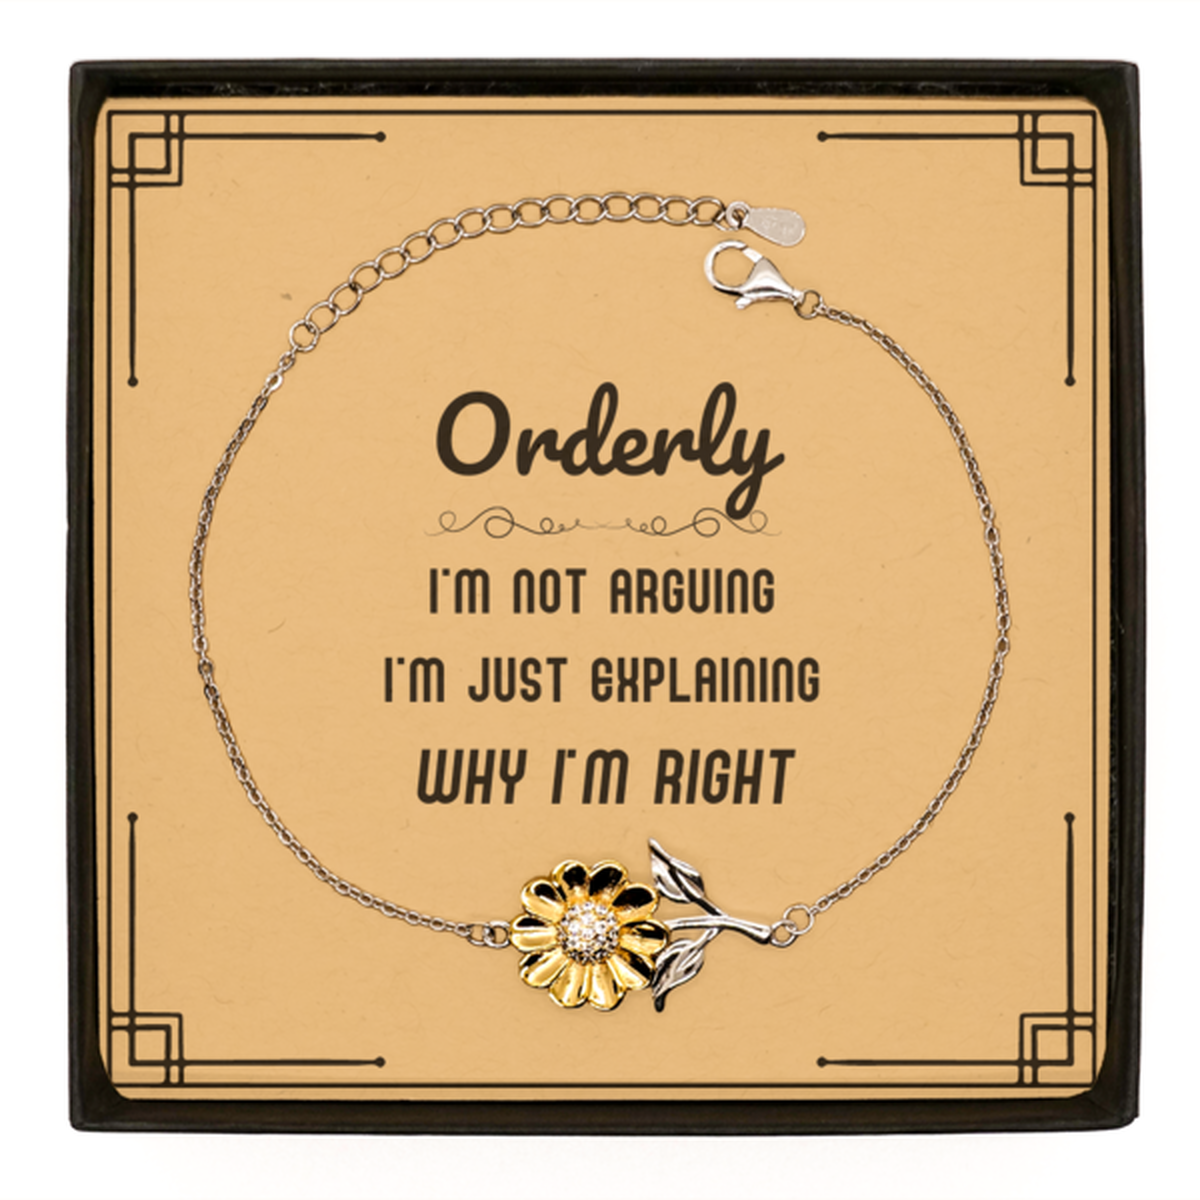 Orderly I'm not Arguing. I'm Just Explaining Why I'm RIGHT Sunflower Bracelet, Funny Saying Quote Orderly Gifts For Orderly Message Card Graduation Birthday Christmas Gifts for Men Women Coworker